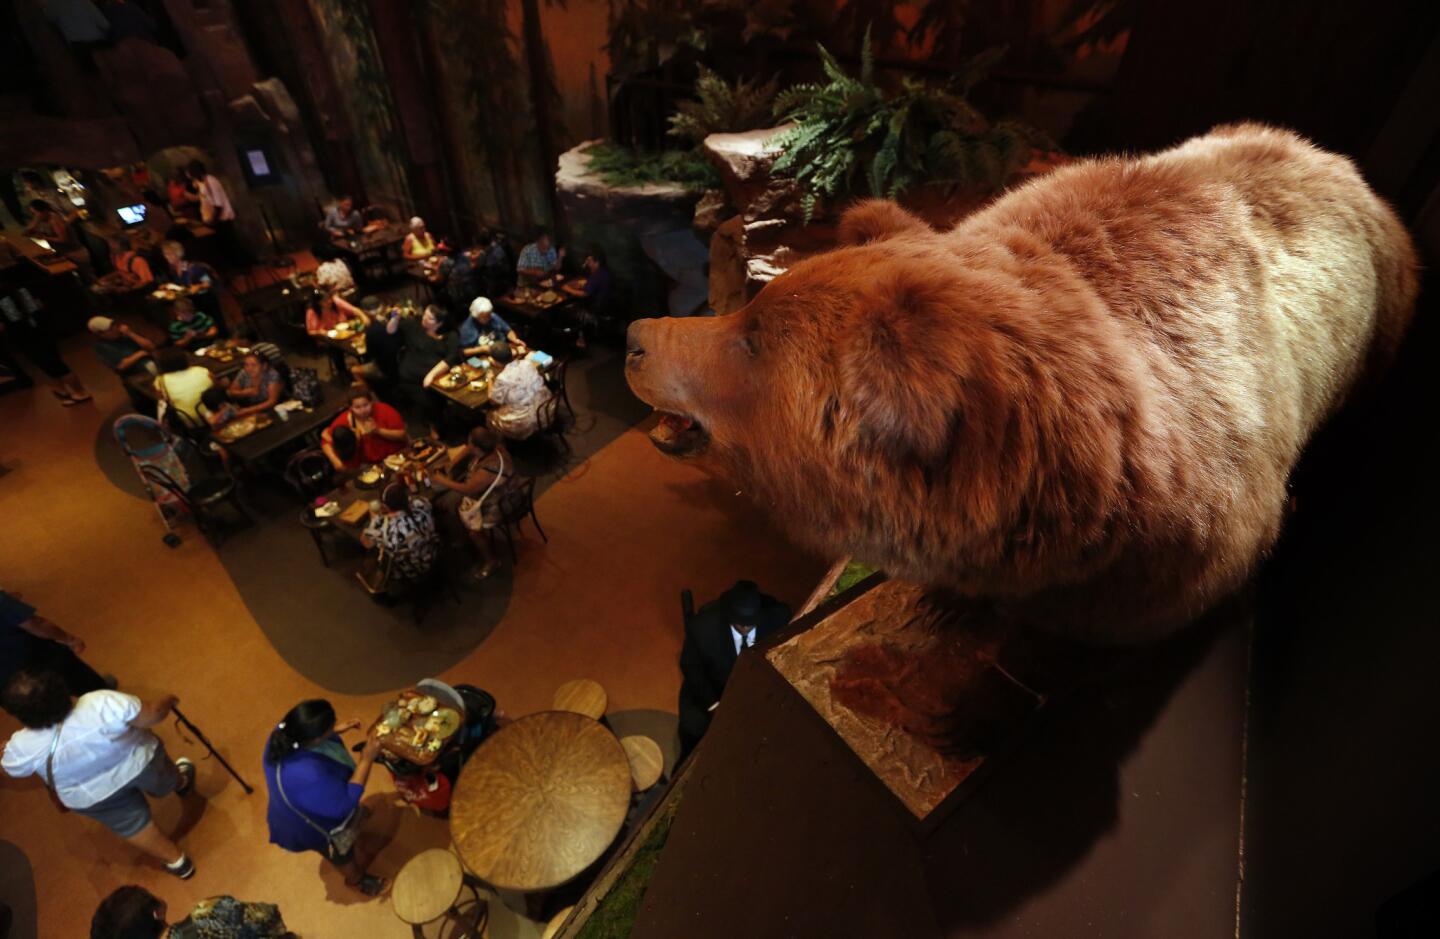 A taxidermy black bear estimated to be 70 to 90 years old is on display inside Clifton's cafeteria on Broadway in downtown Los Angeles.